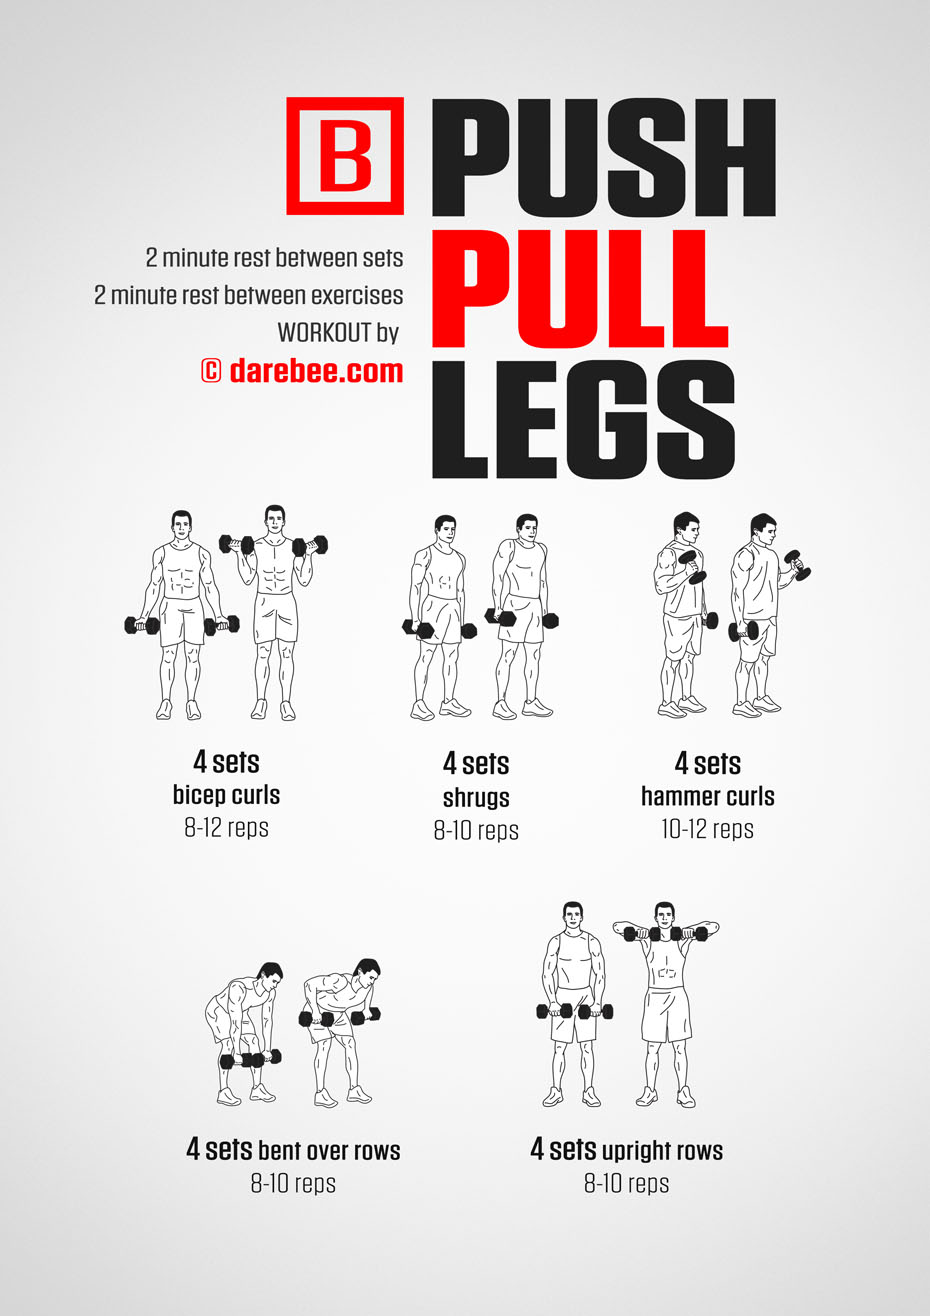 Push, Pull, Legs is a Darebee home-fitness workout for building upper body strength.